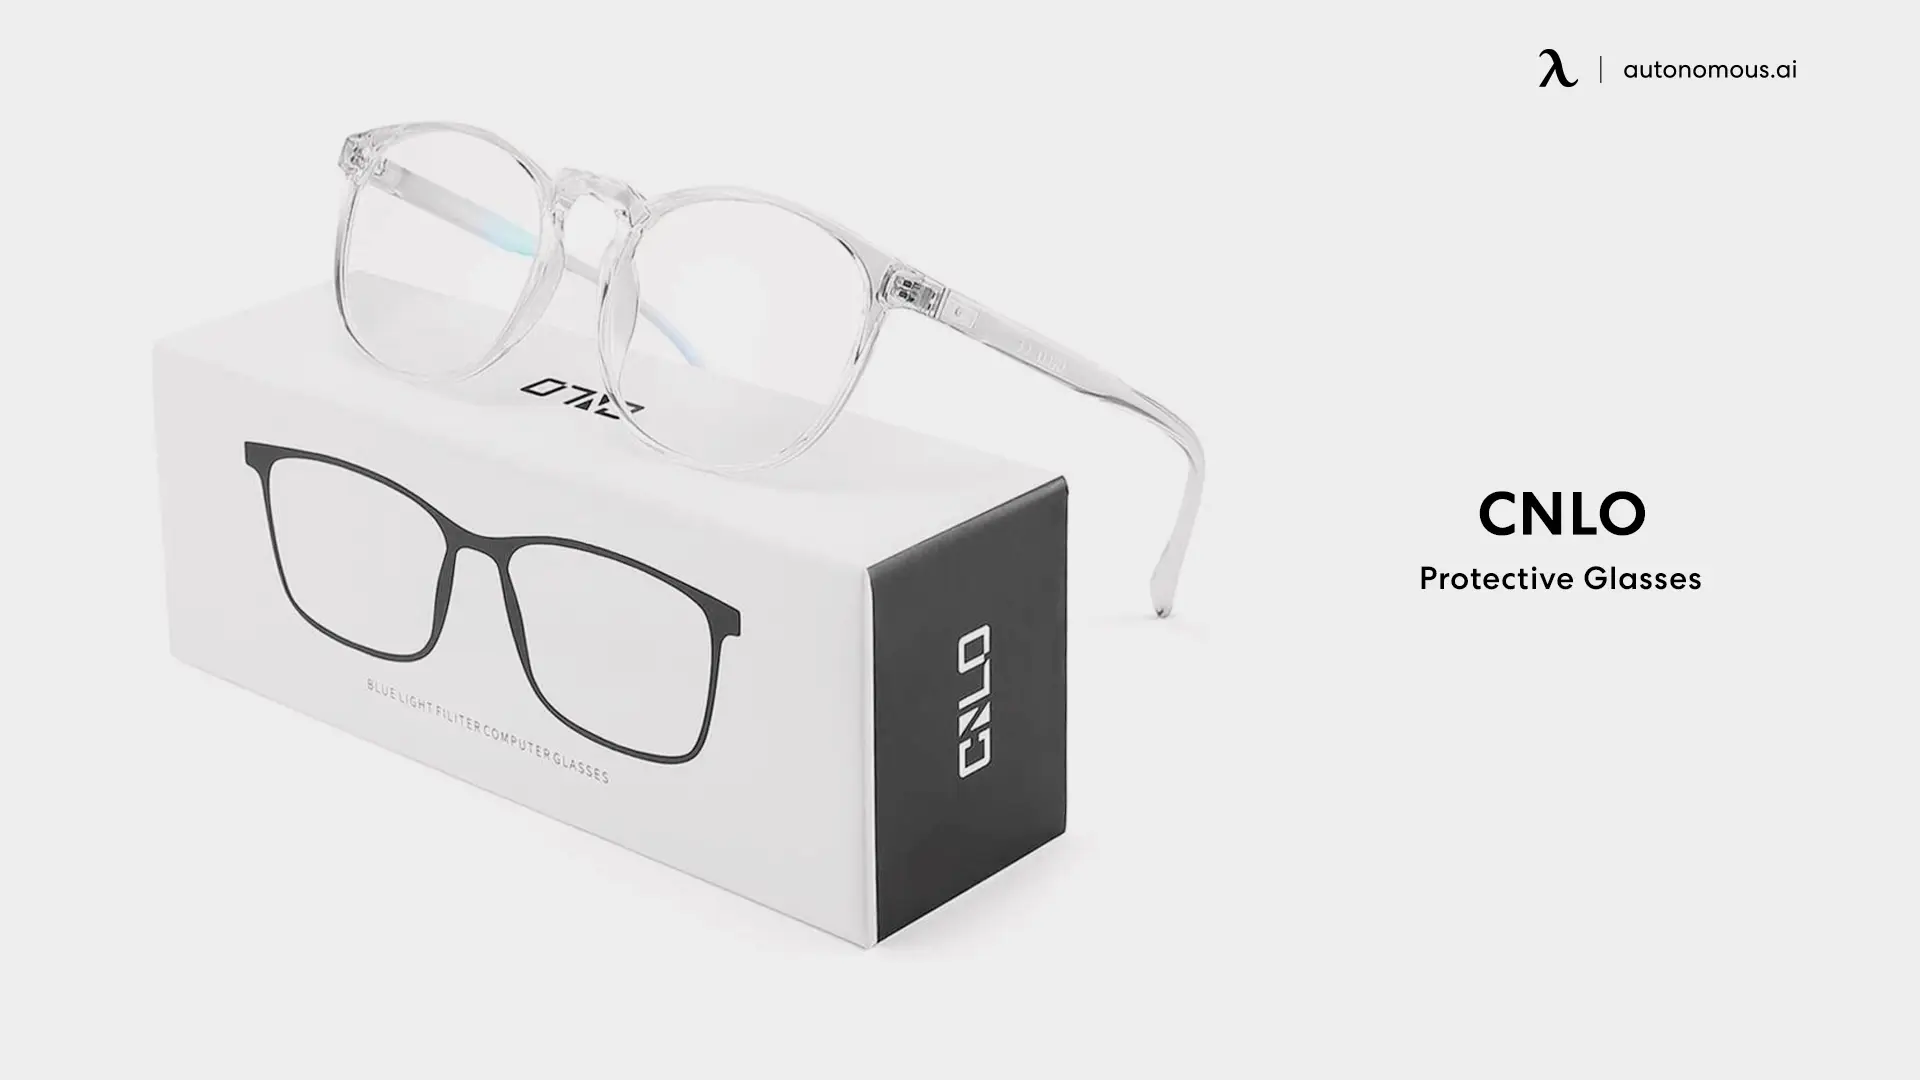 CNLO Protective Glasses - cool christmas gifts